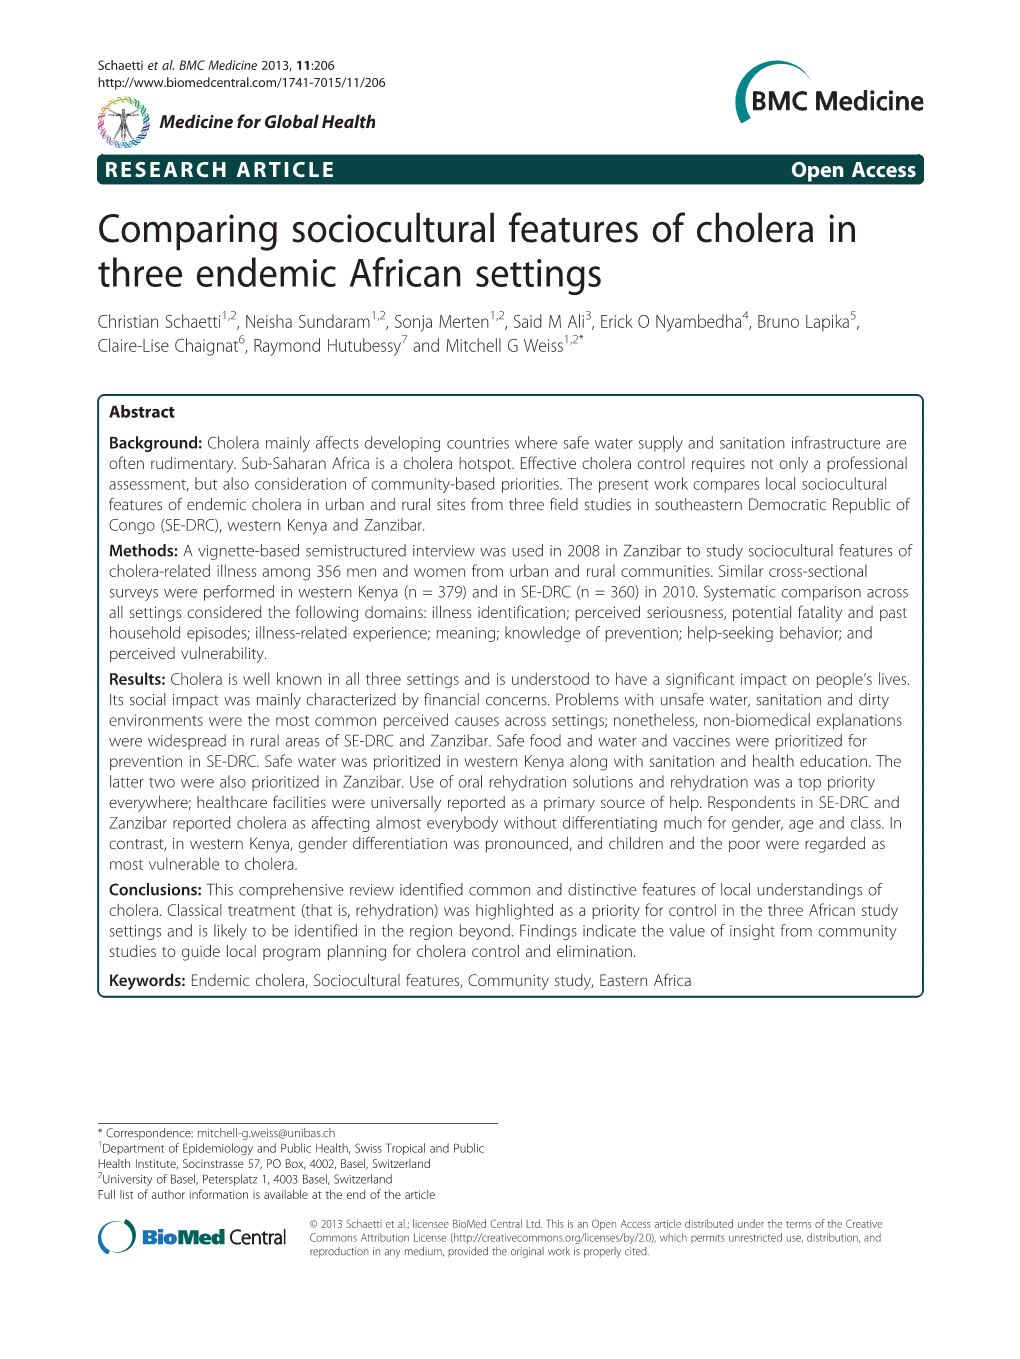 Comparing Sociocultural Features of Cholera in Three Endemic African